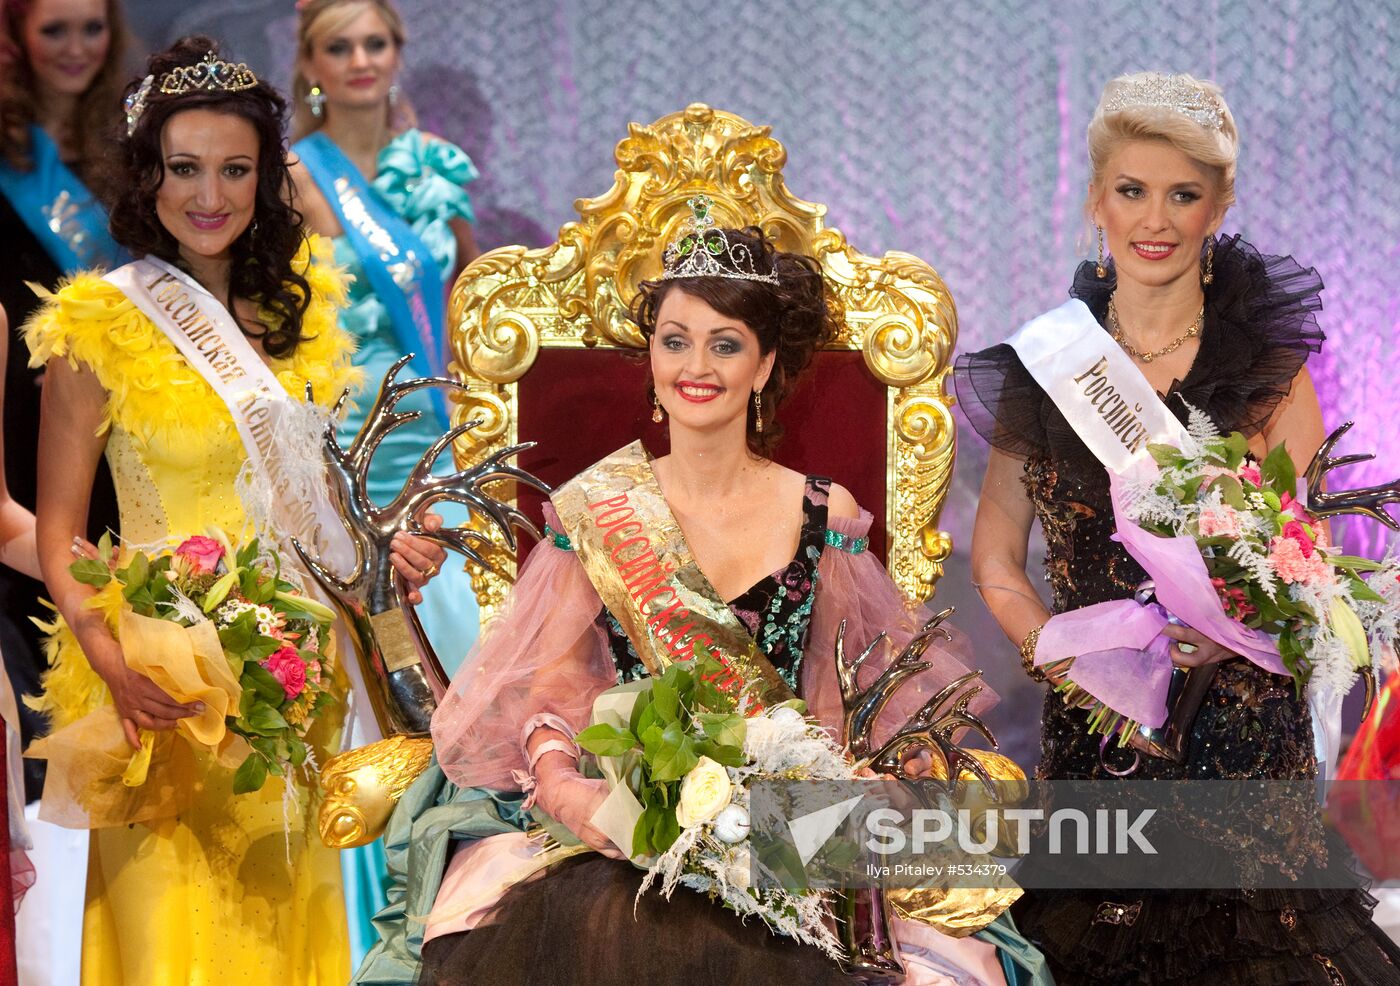 Mrs. Russia 2009 beauty pageant